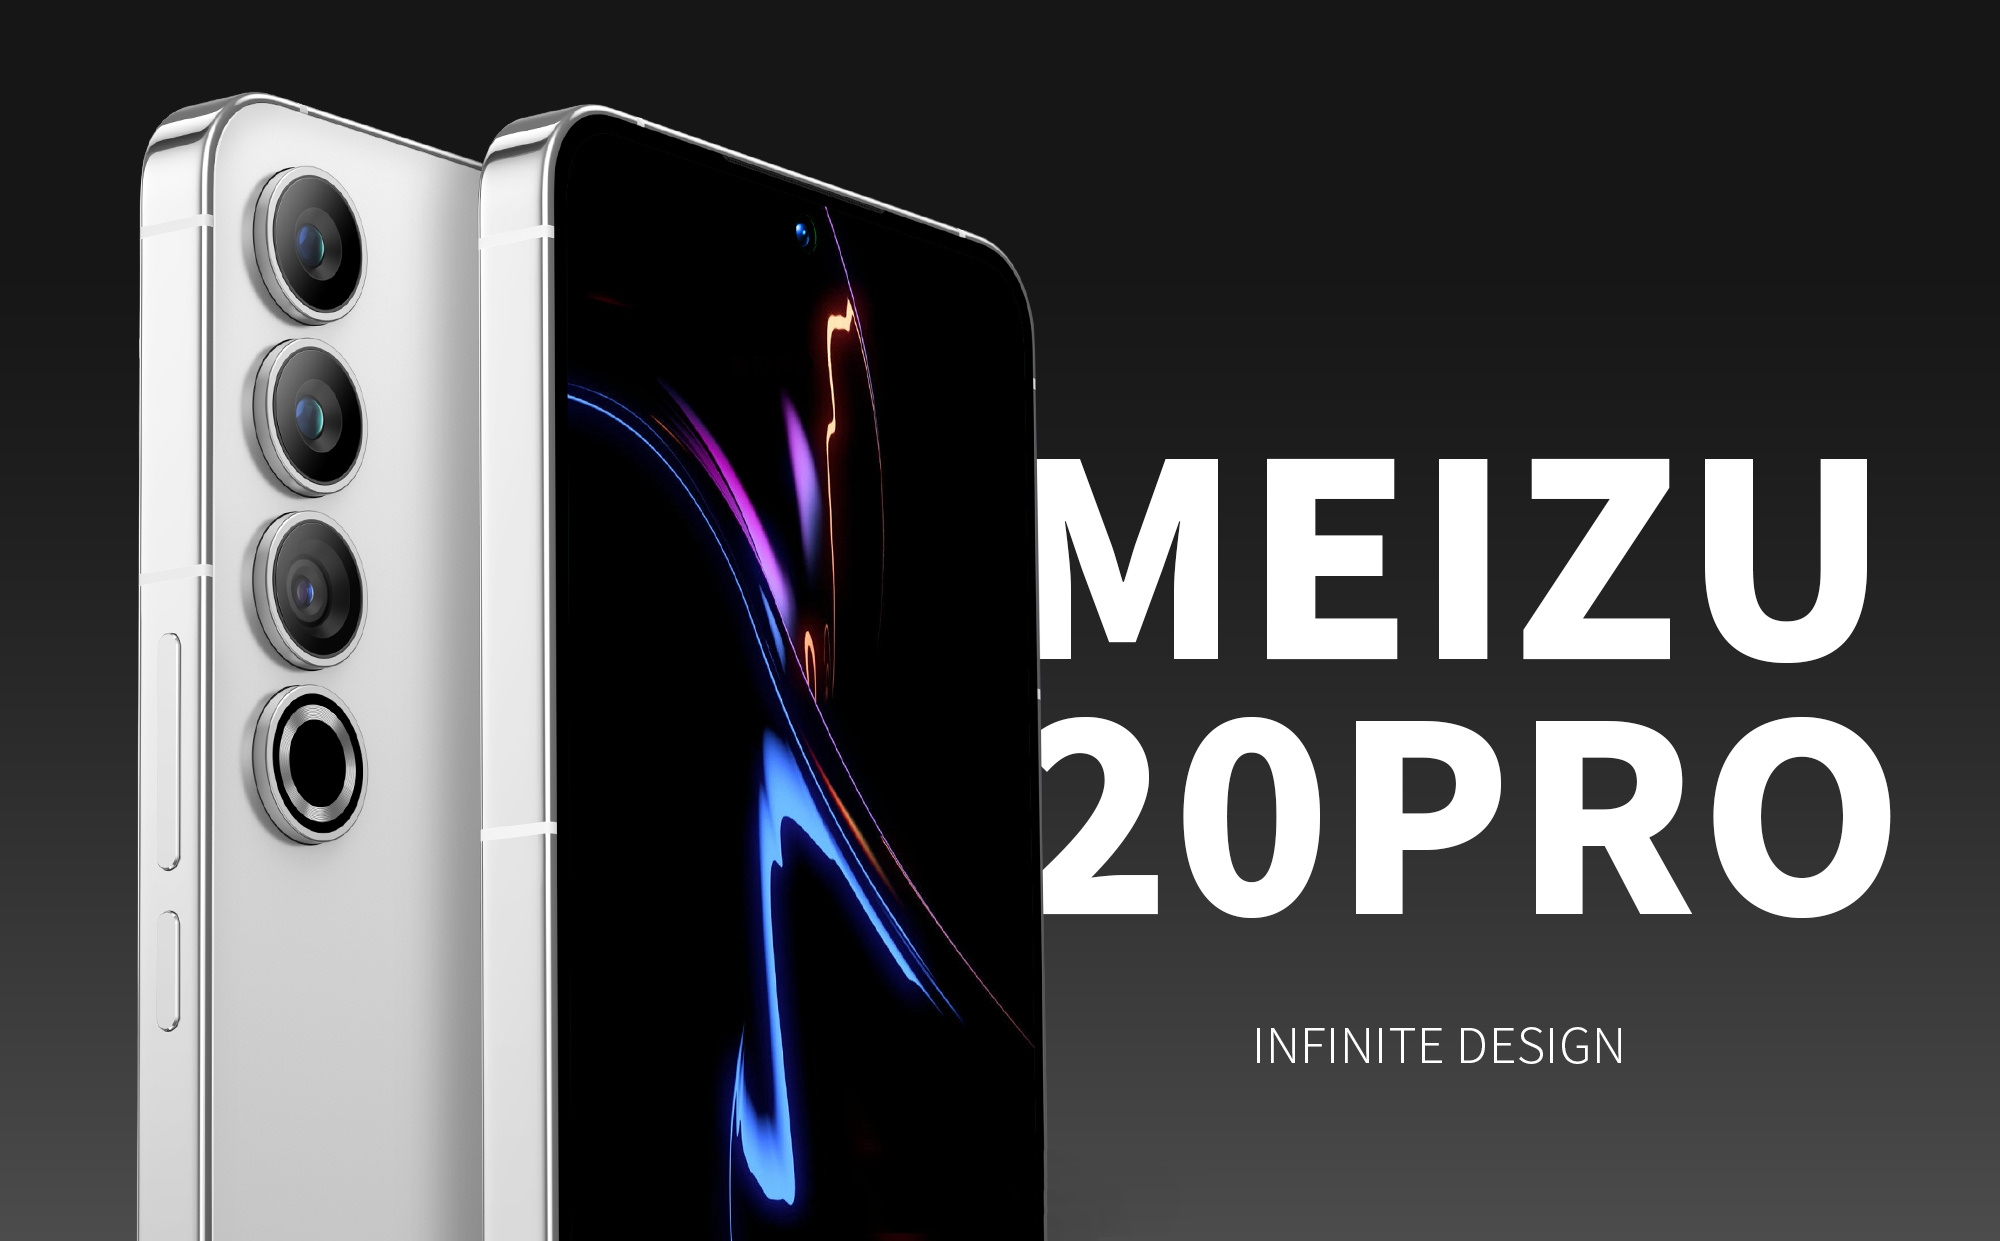 Snapdragon 8 Gen 2, 144Hz AMOLED E6 WQHD+ screen, Quad camera and Flyme Auto support for $650 - Meizu 20 Pro specifications and price revealed